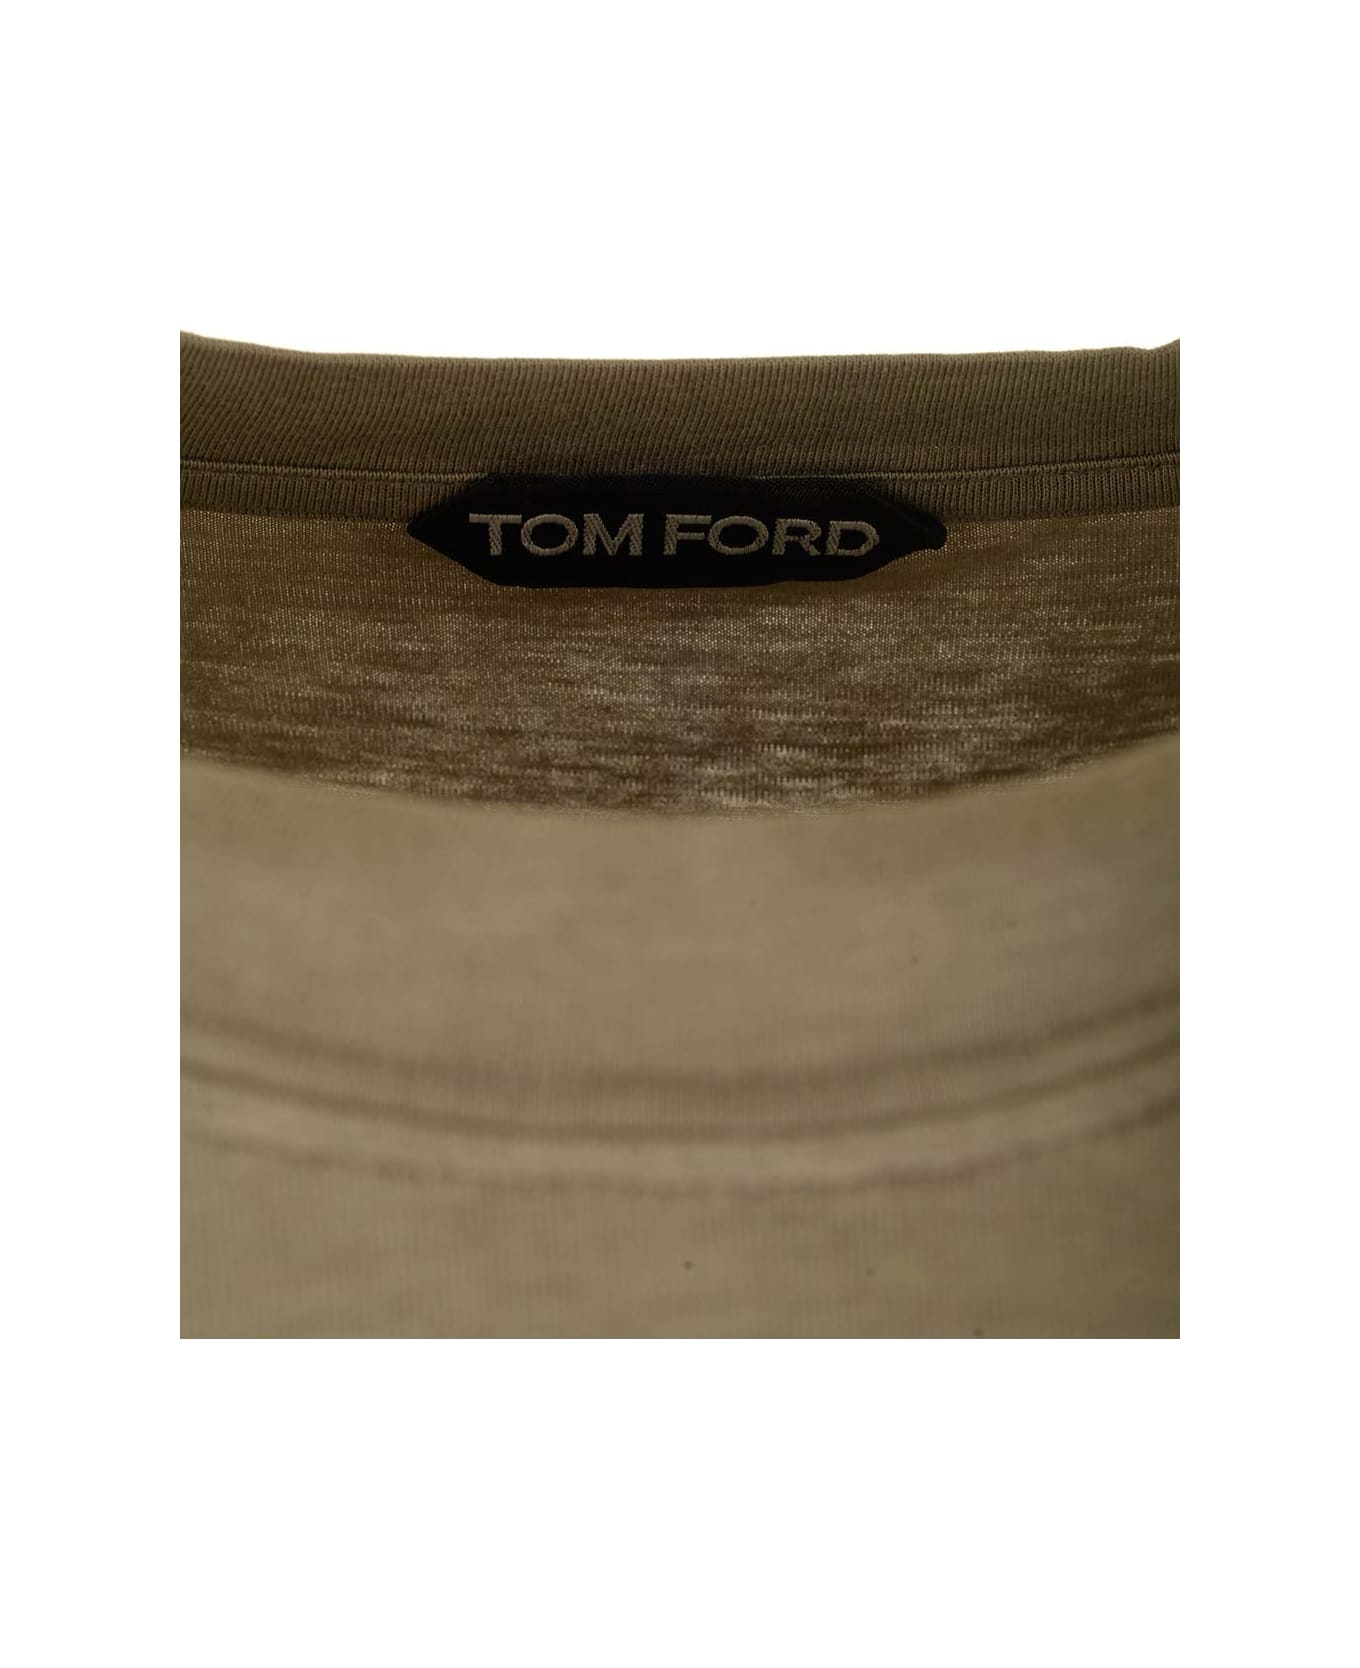 Tom Ford Military Green T-shirt - Pale army